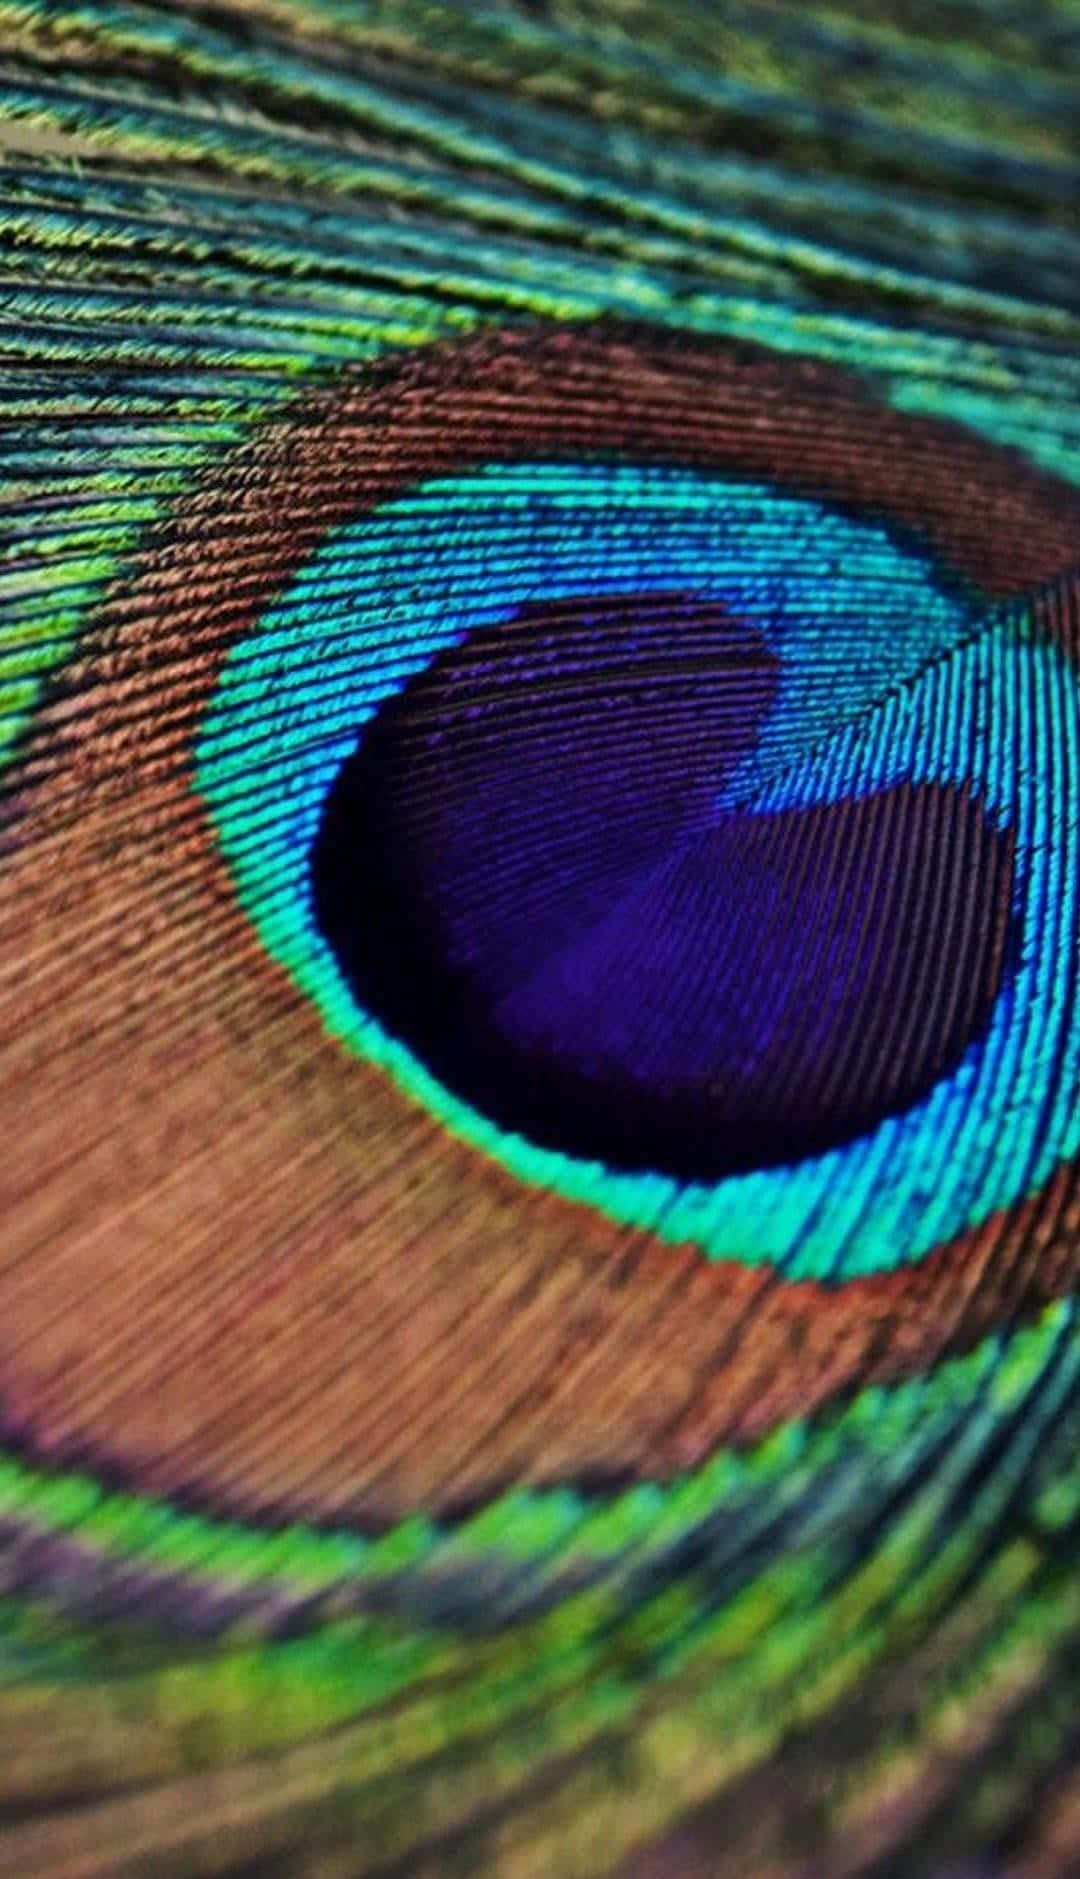 A vibrant peacock feather showcasing its unique pattern